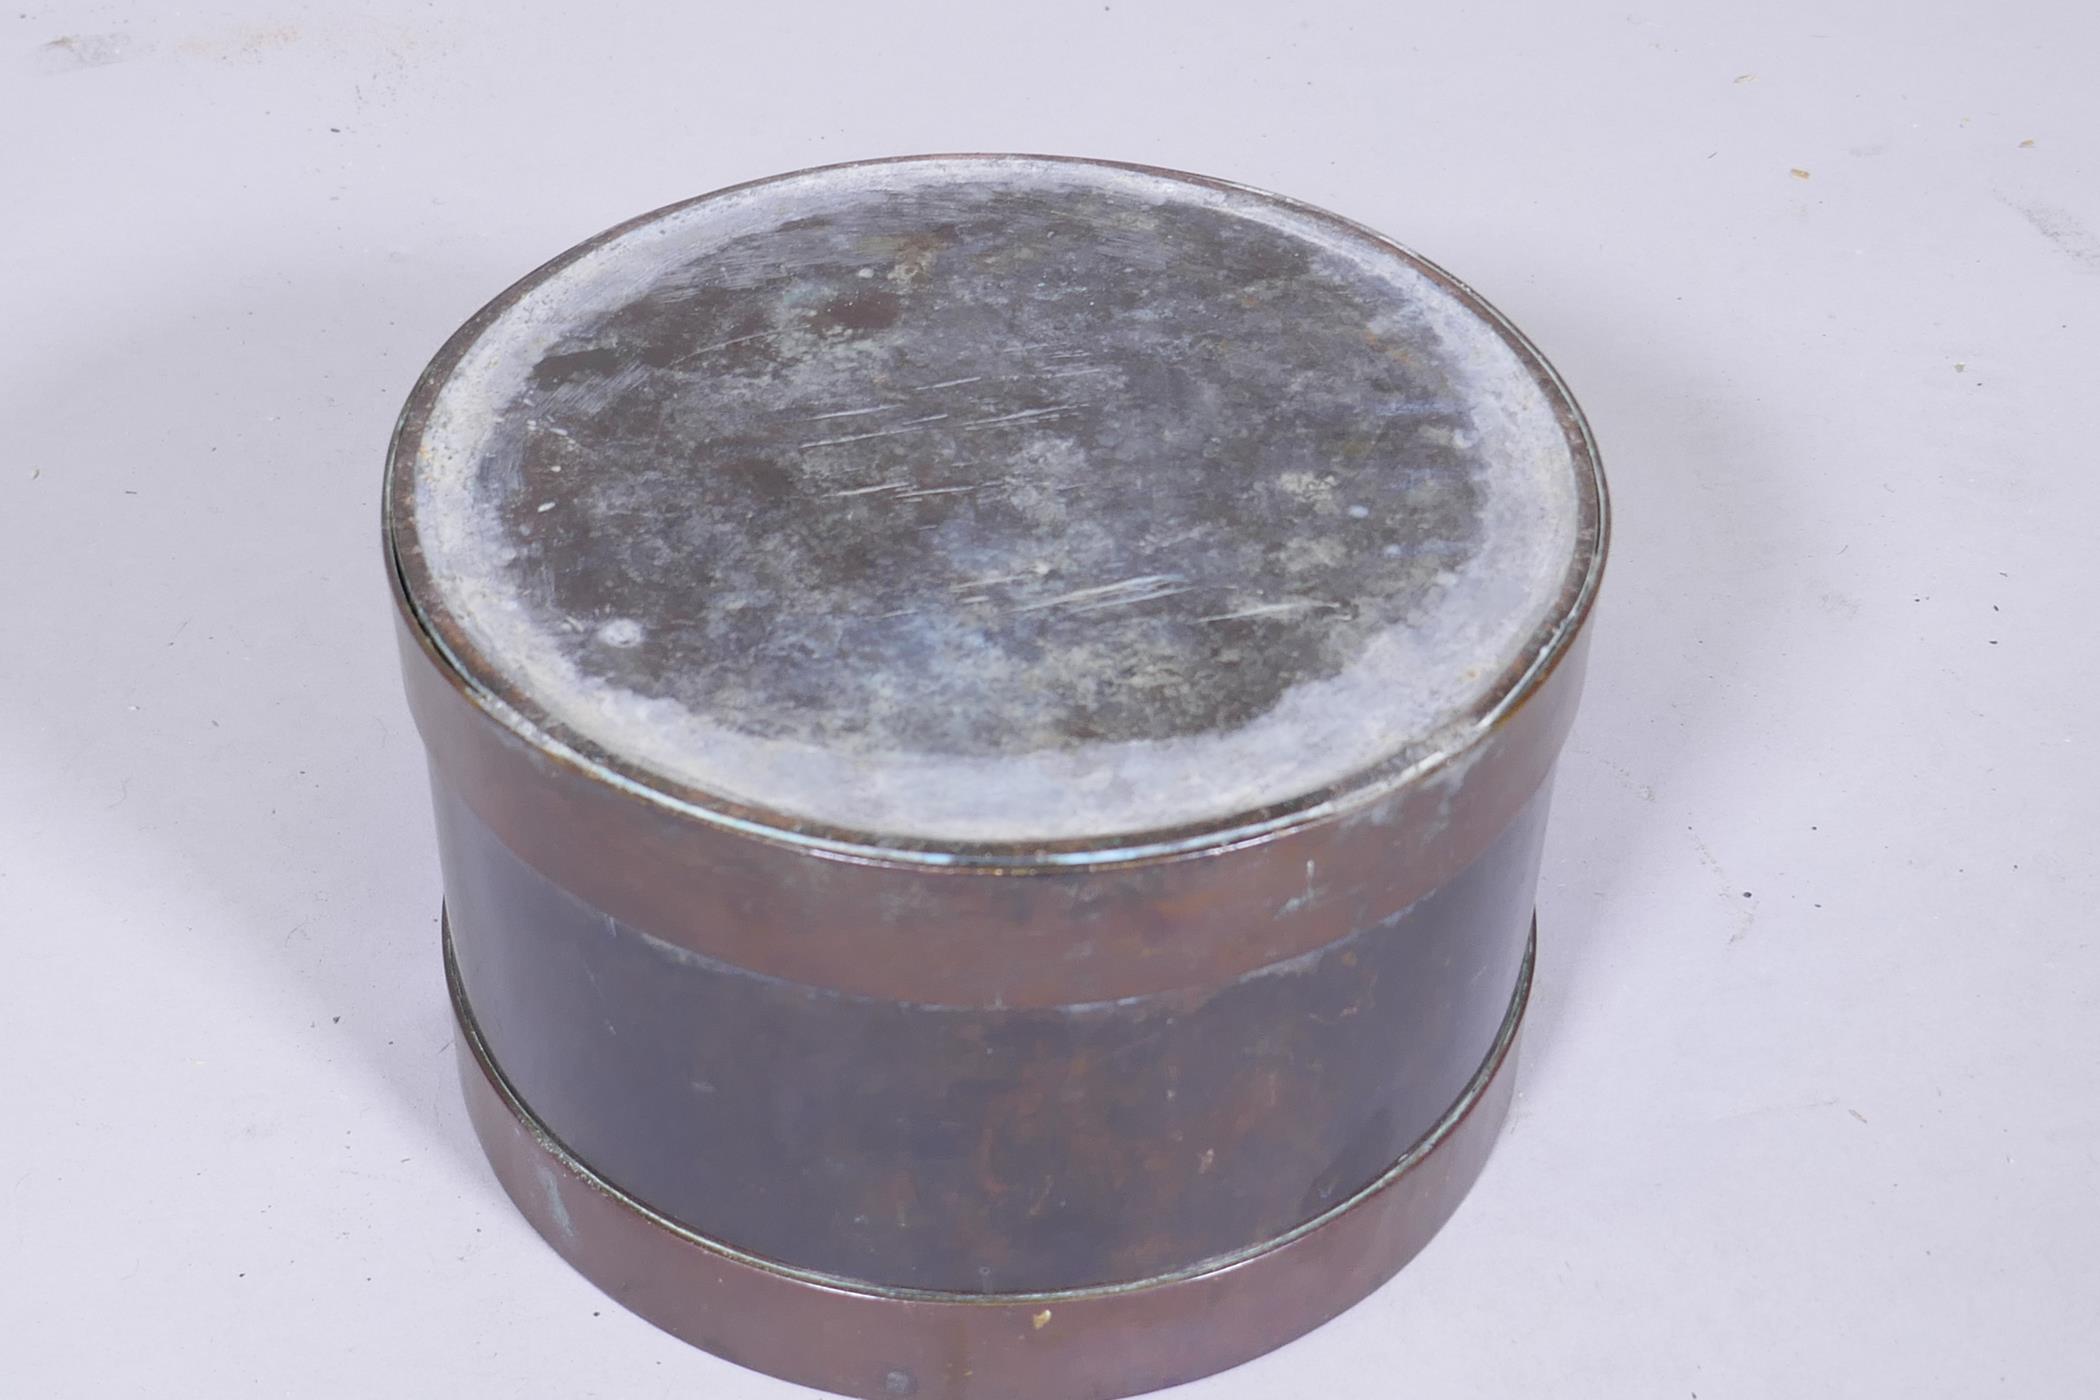 A C19th bronze and copper pot/planter with good patination, 19cm diameter, 12cm high - Image 3 of 3